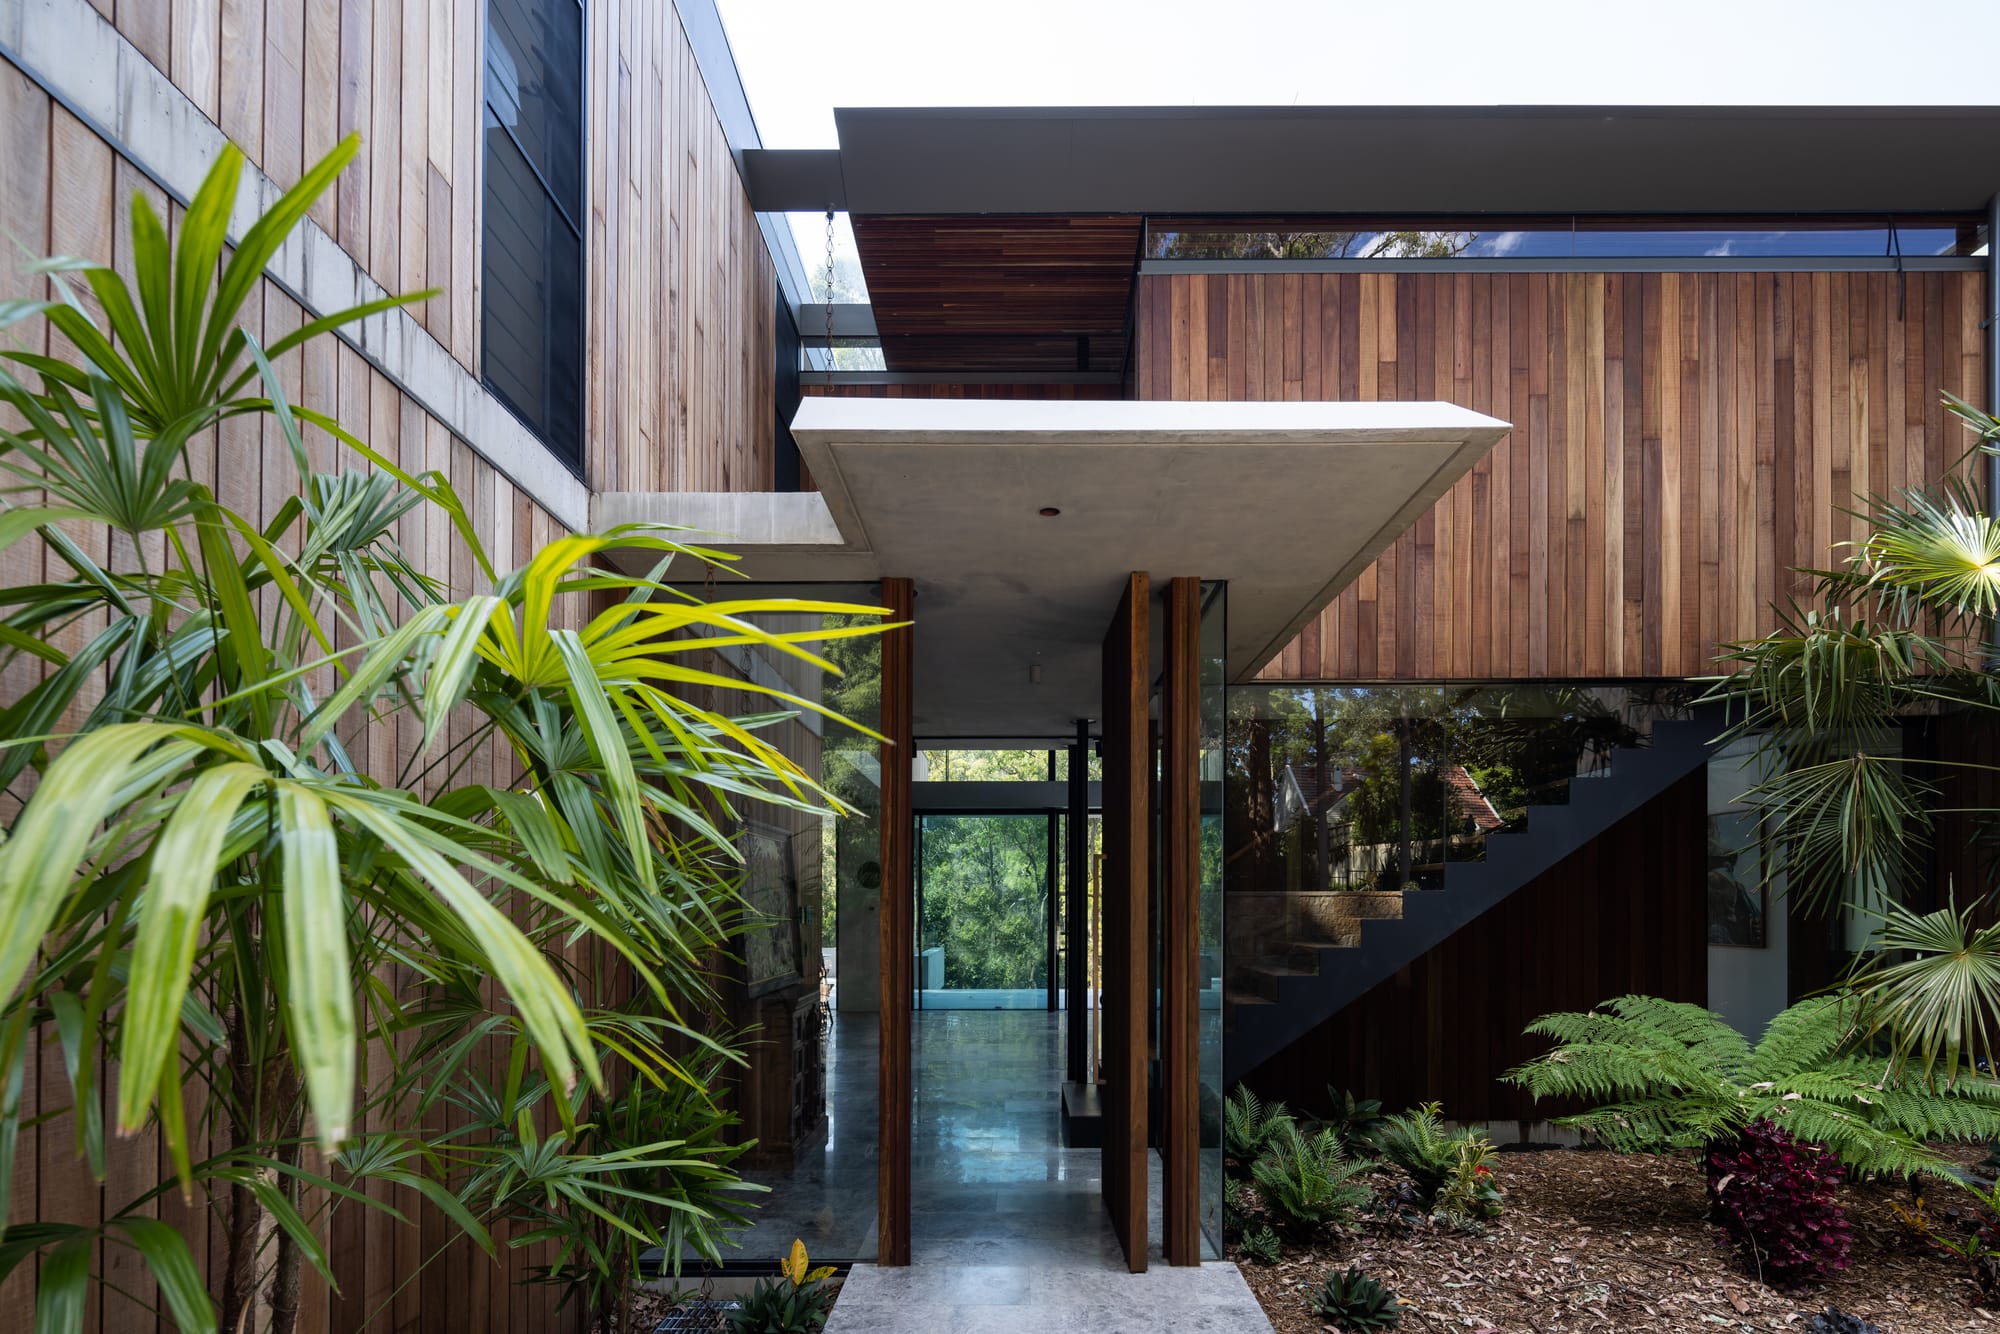 Mortlock Timbers Series: Fox Valley House. Photography by Simon Whitbread. Entrance to double storey residential home. Timber clad exterior walls and enclosed glass entryway. Garden with native plants. 